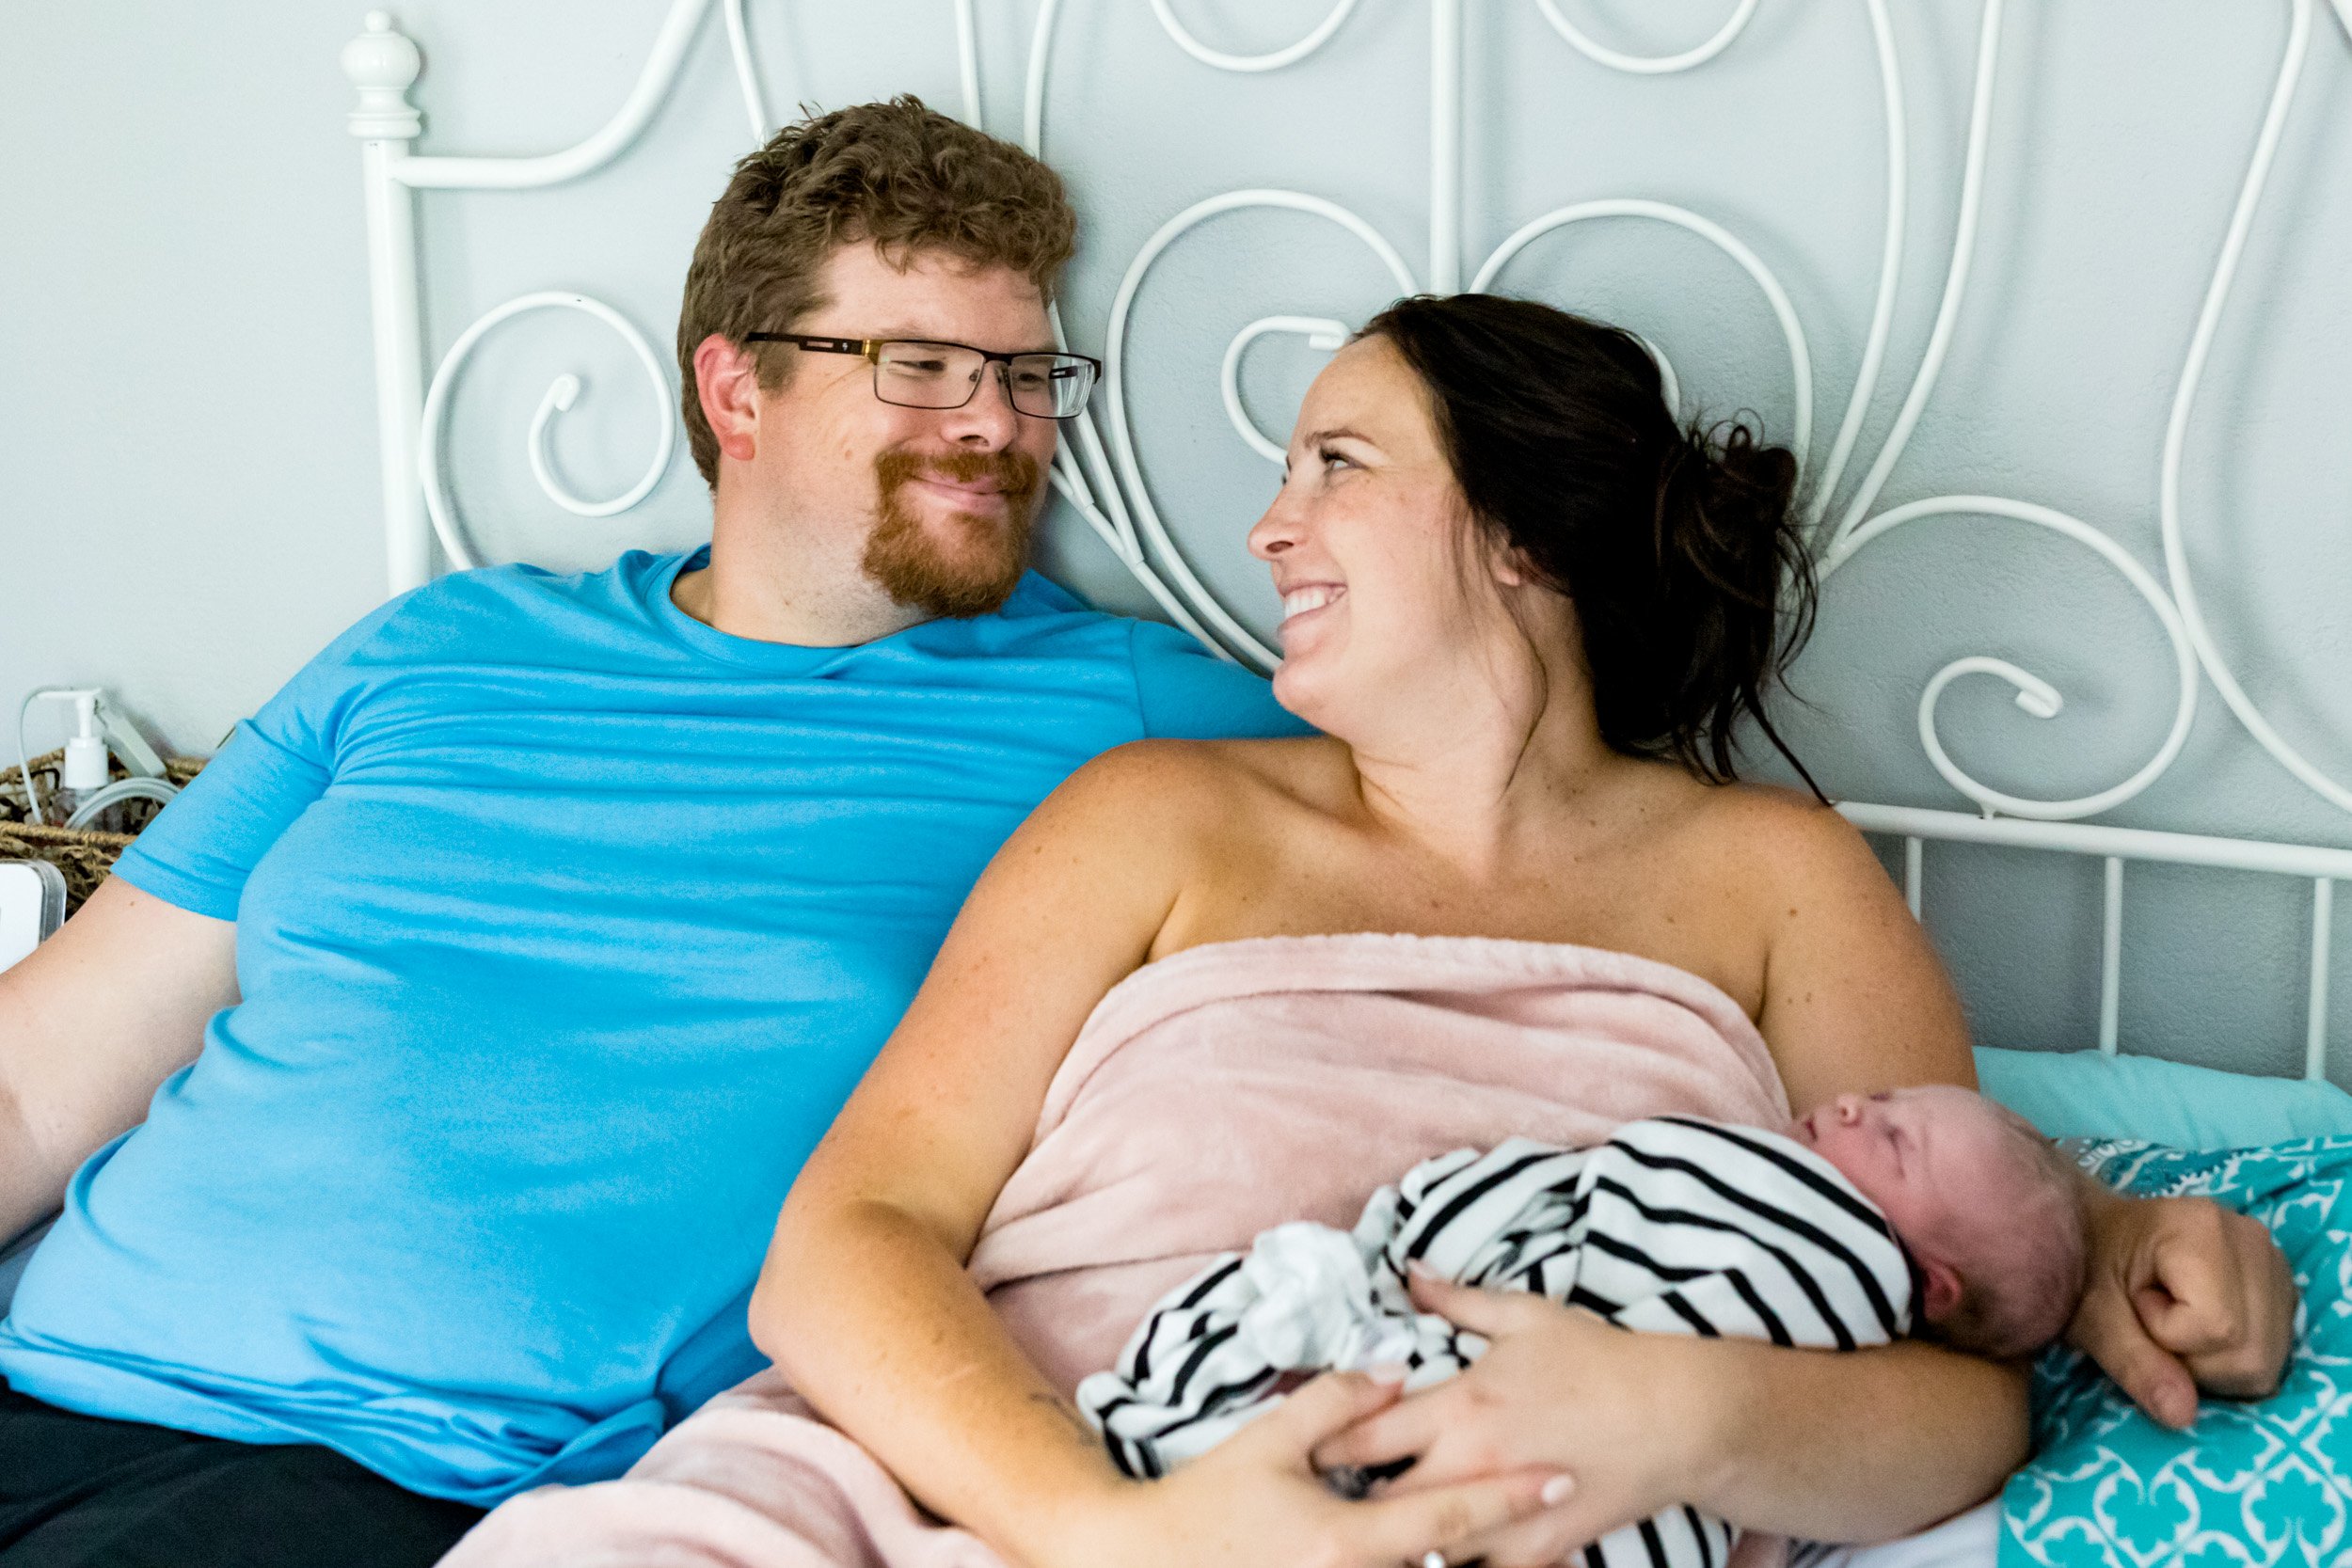 Jacksonville parents smiling at each other just after the birth of their baby girl